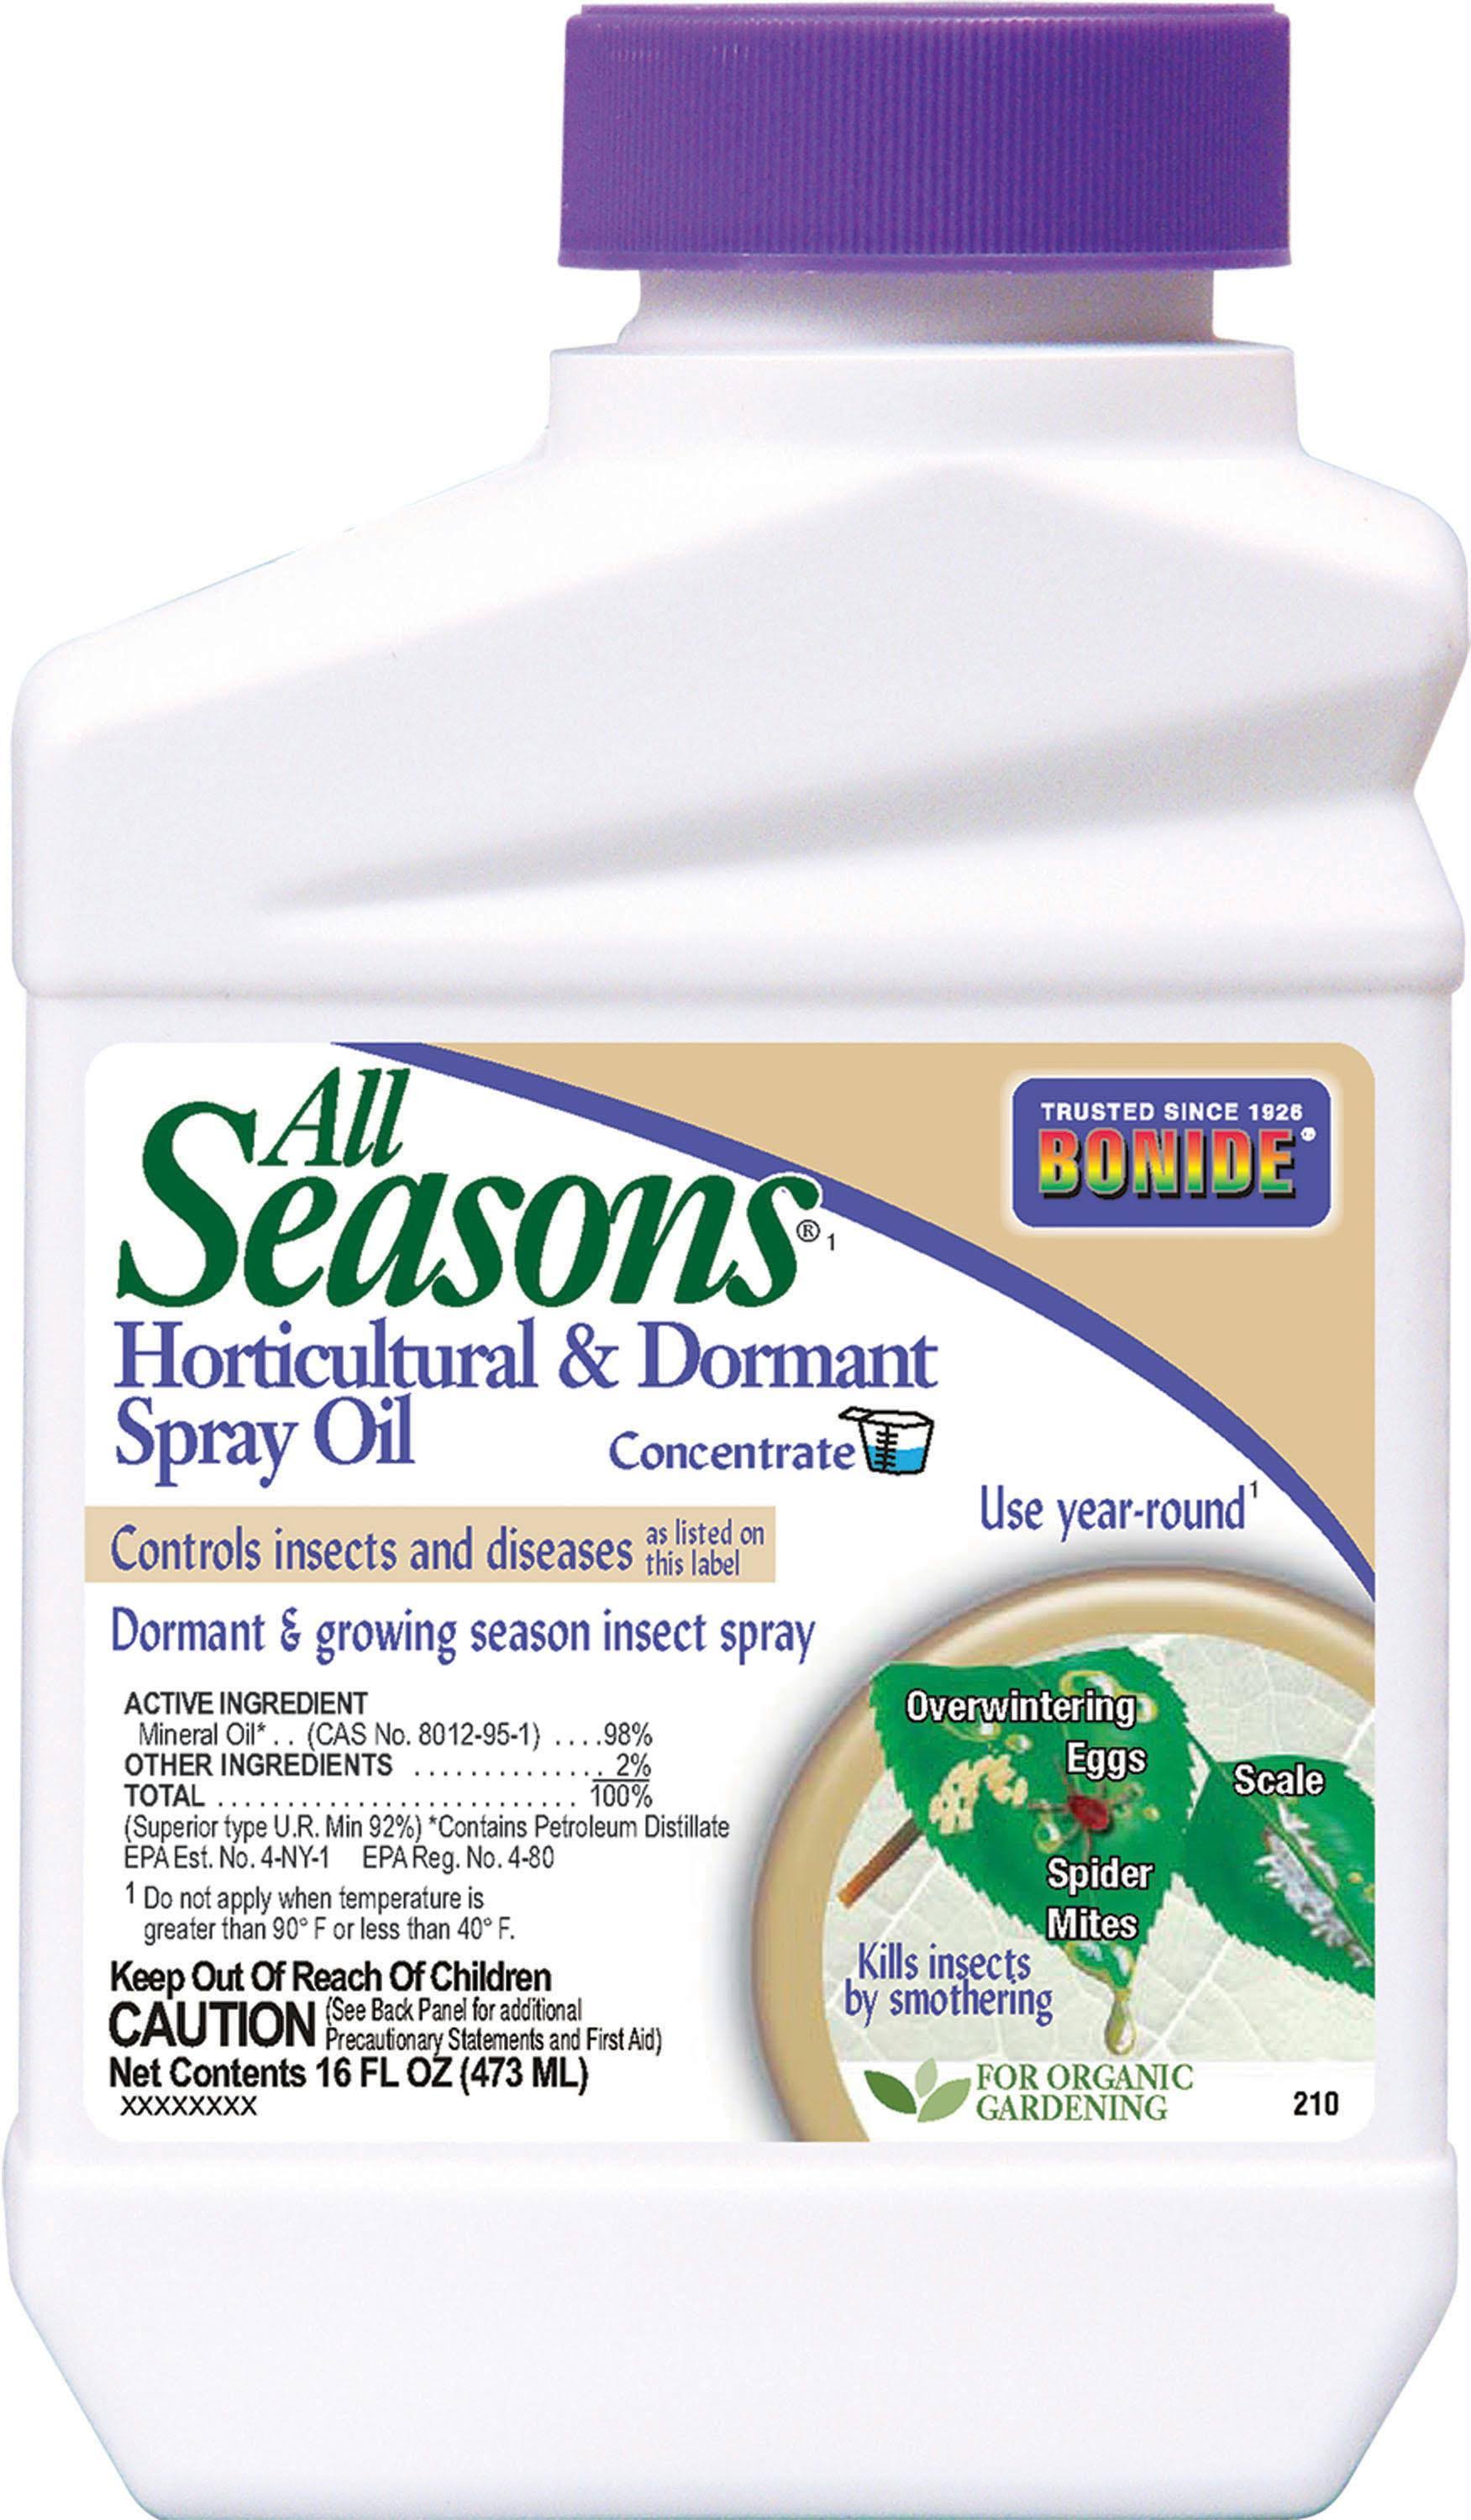 Bonide Products All Seasons Horticultural Spray Oil Concentrate - 16oz